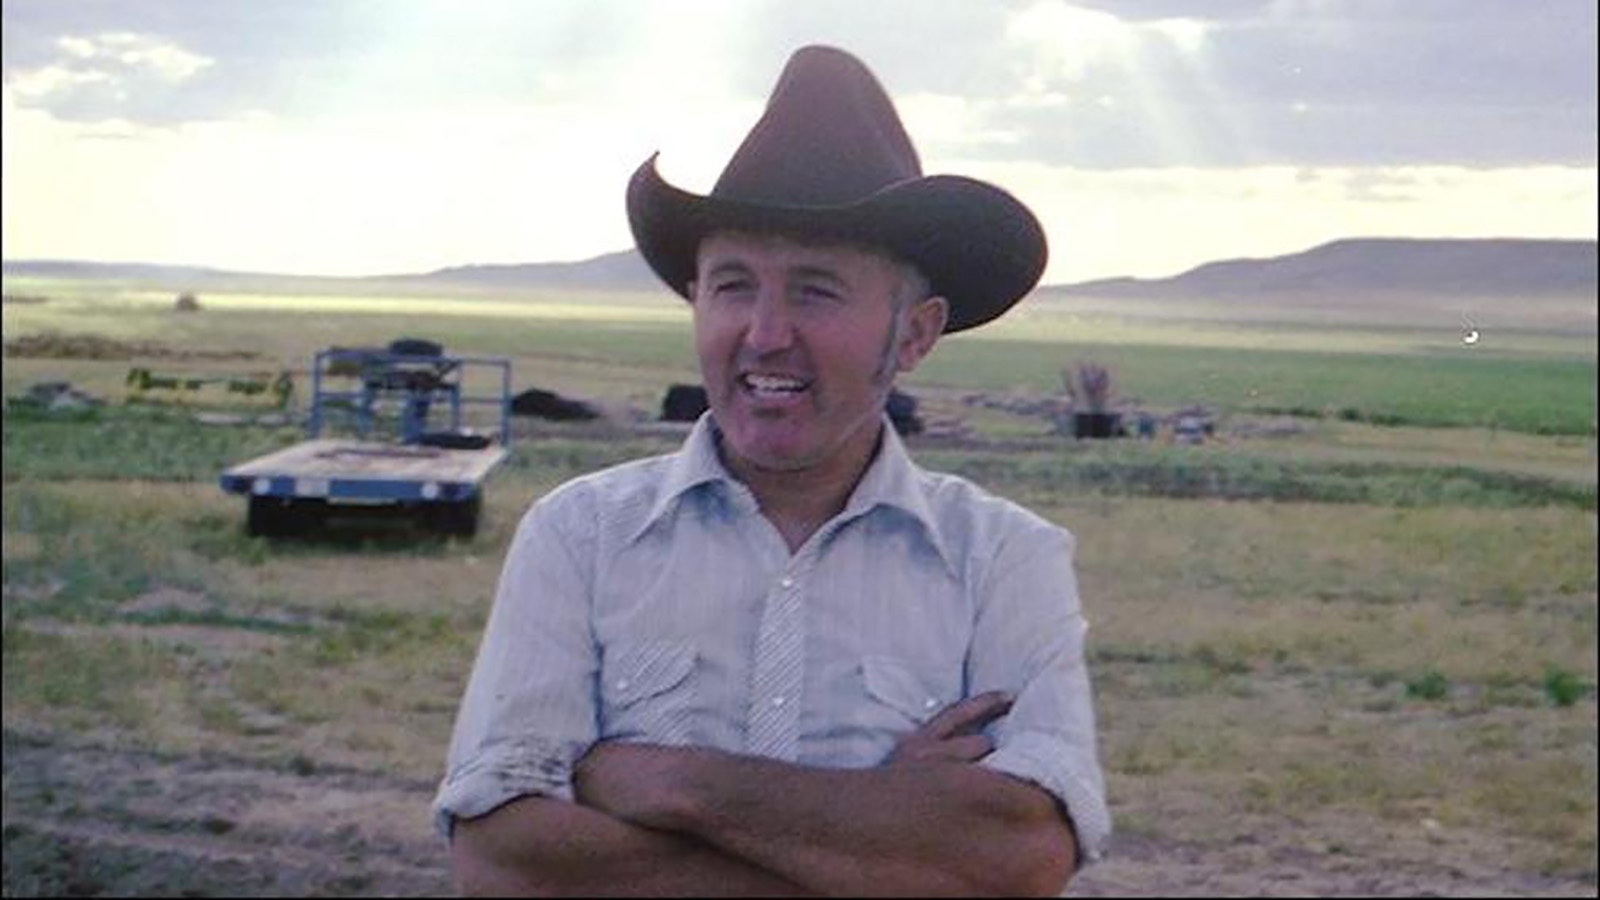 Pat McGuire was a Wyoming rancher in the Bosler area in 1973 when he claims to have had an encounter with extraterrestrials while on a hunting trip.